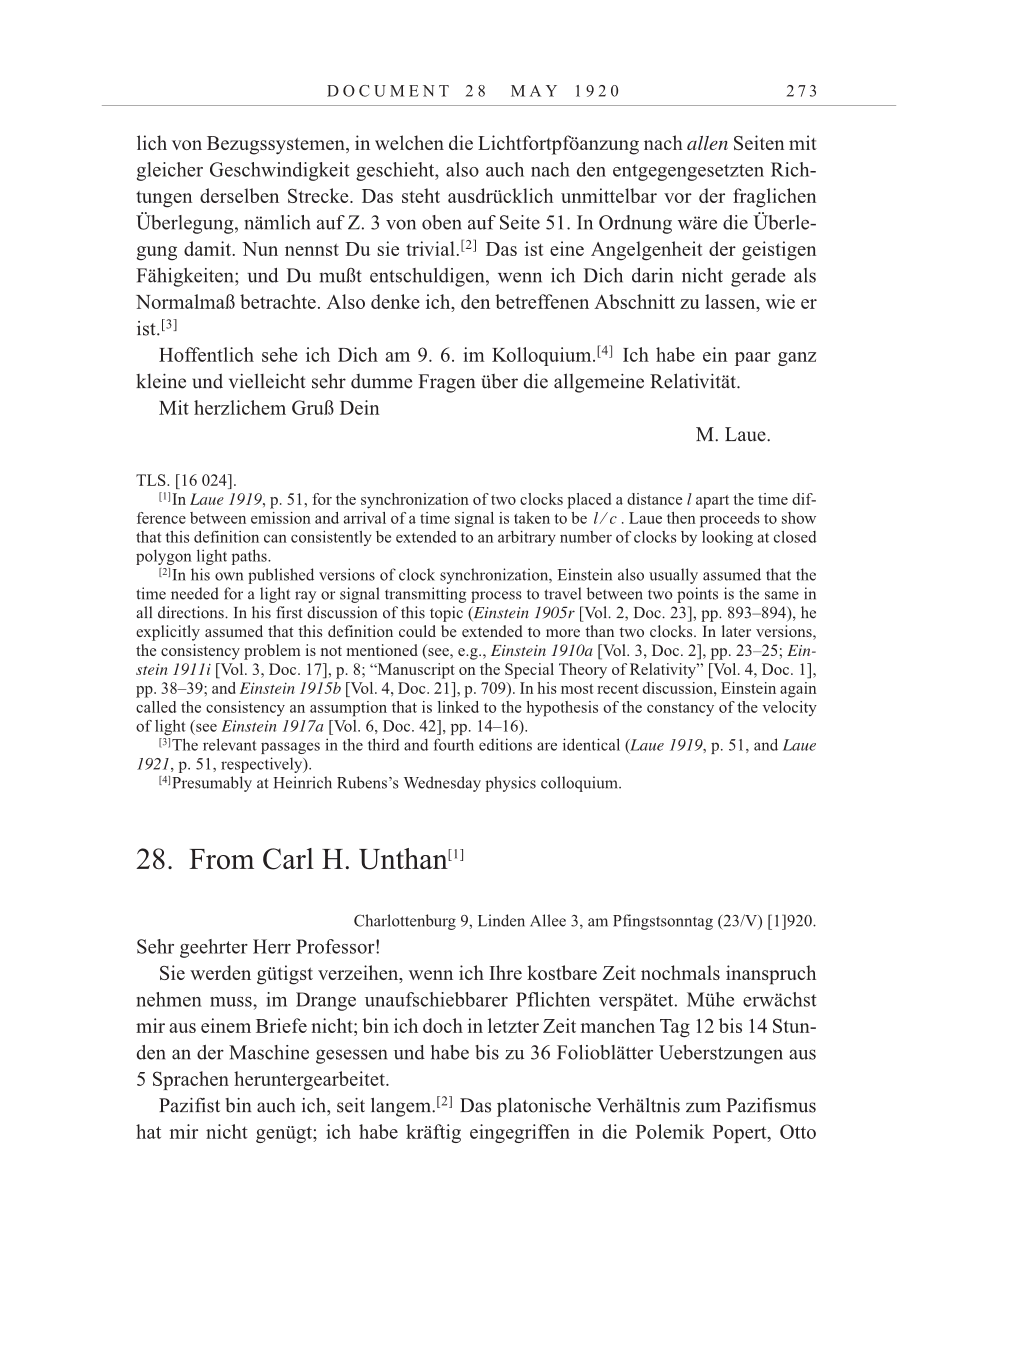 Volume 10: The Berlin Years: Correspondence May-December 1920 / Supplementary Correspondence 1909-1920 page 273